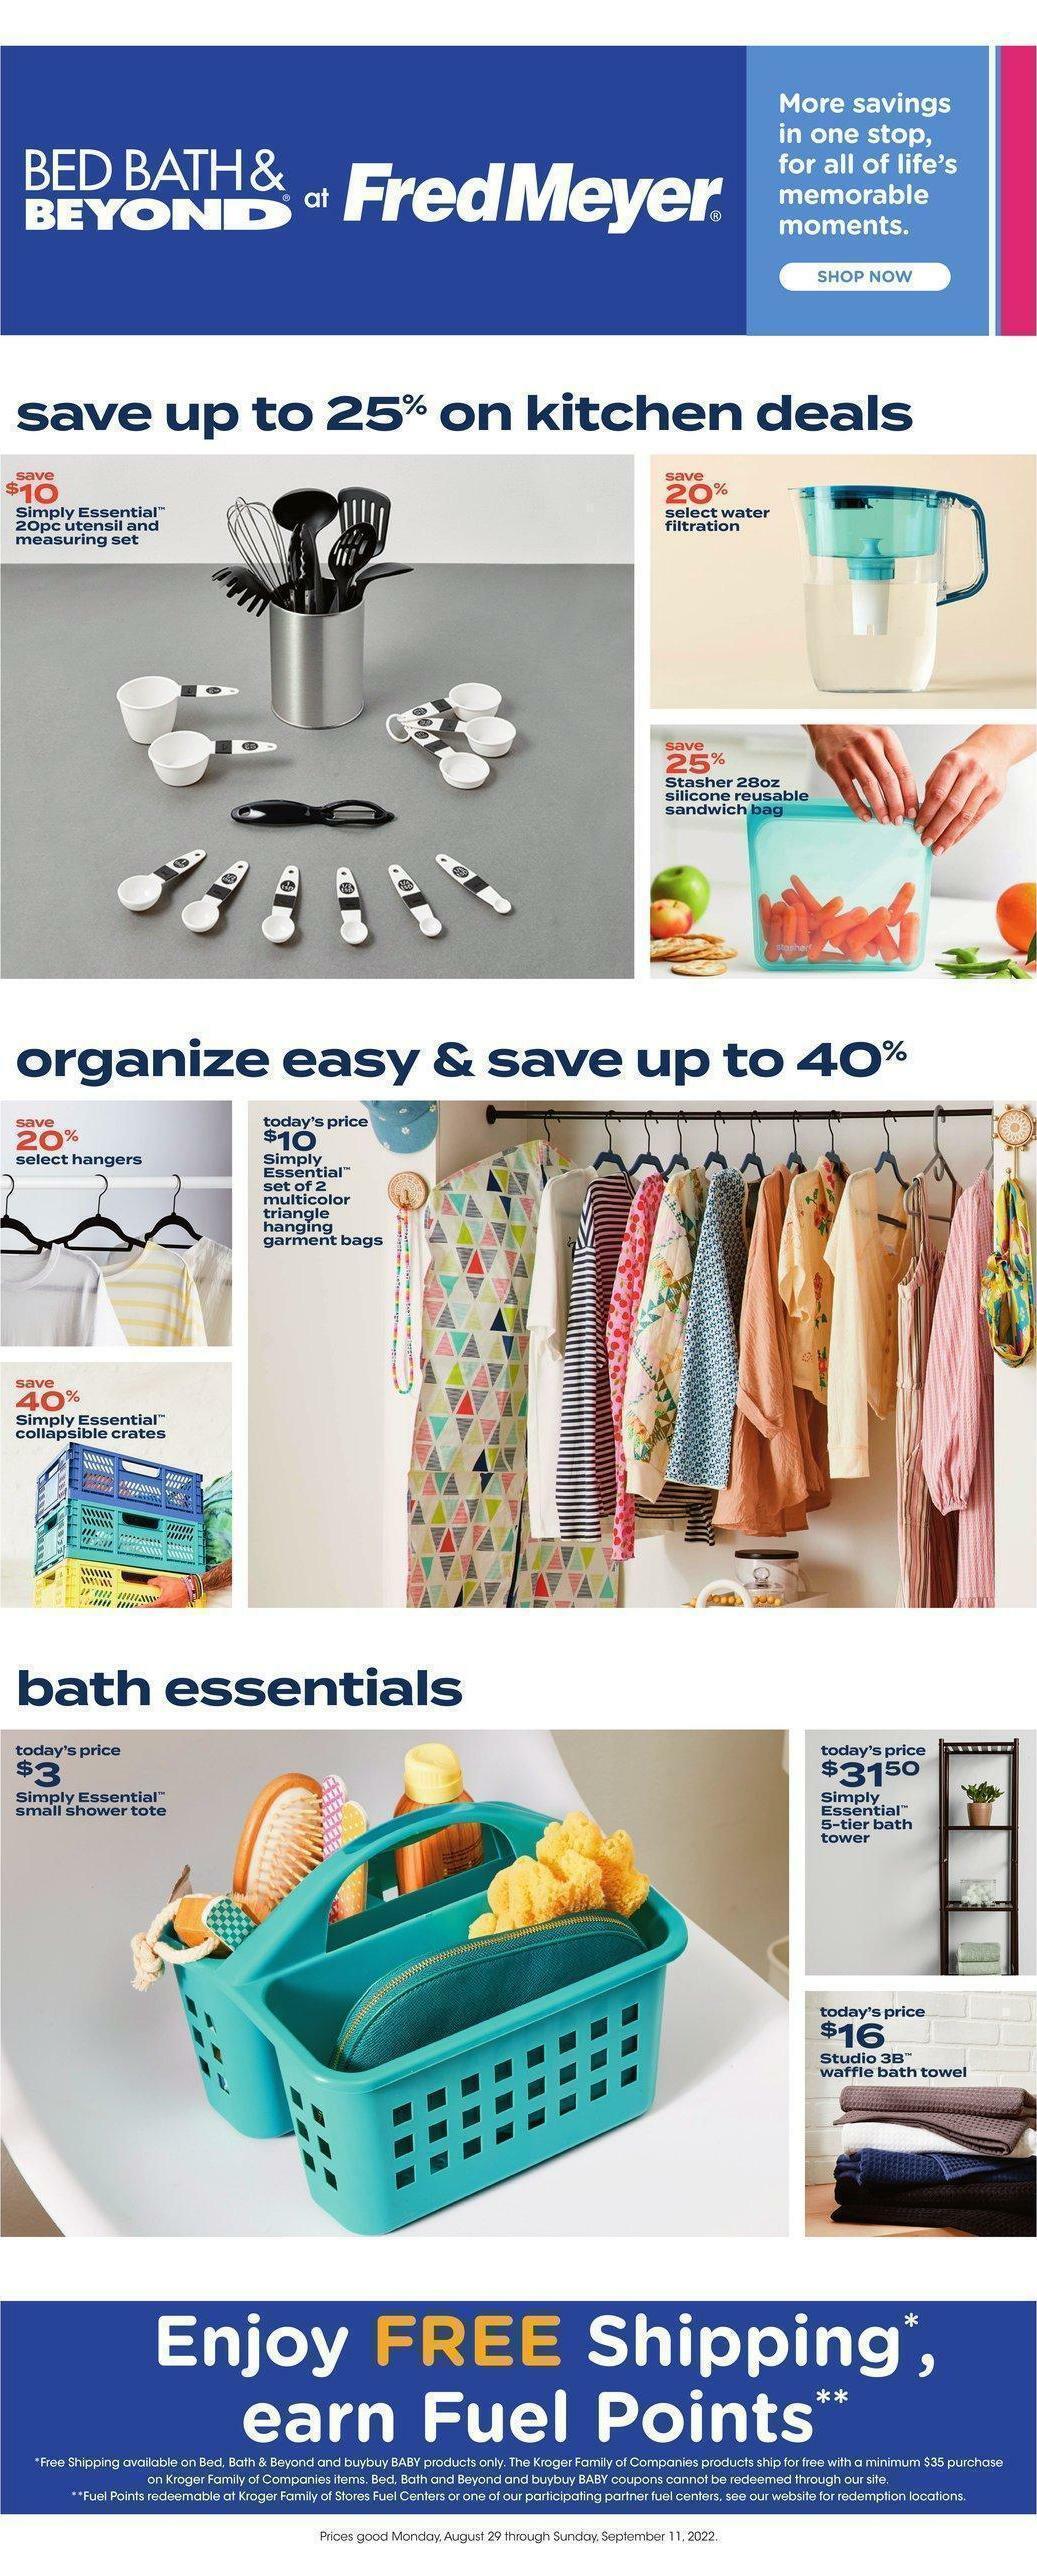 Fred Meyer Bed, Bath & Beyond Weekly Ad from August 29